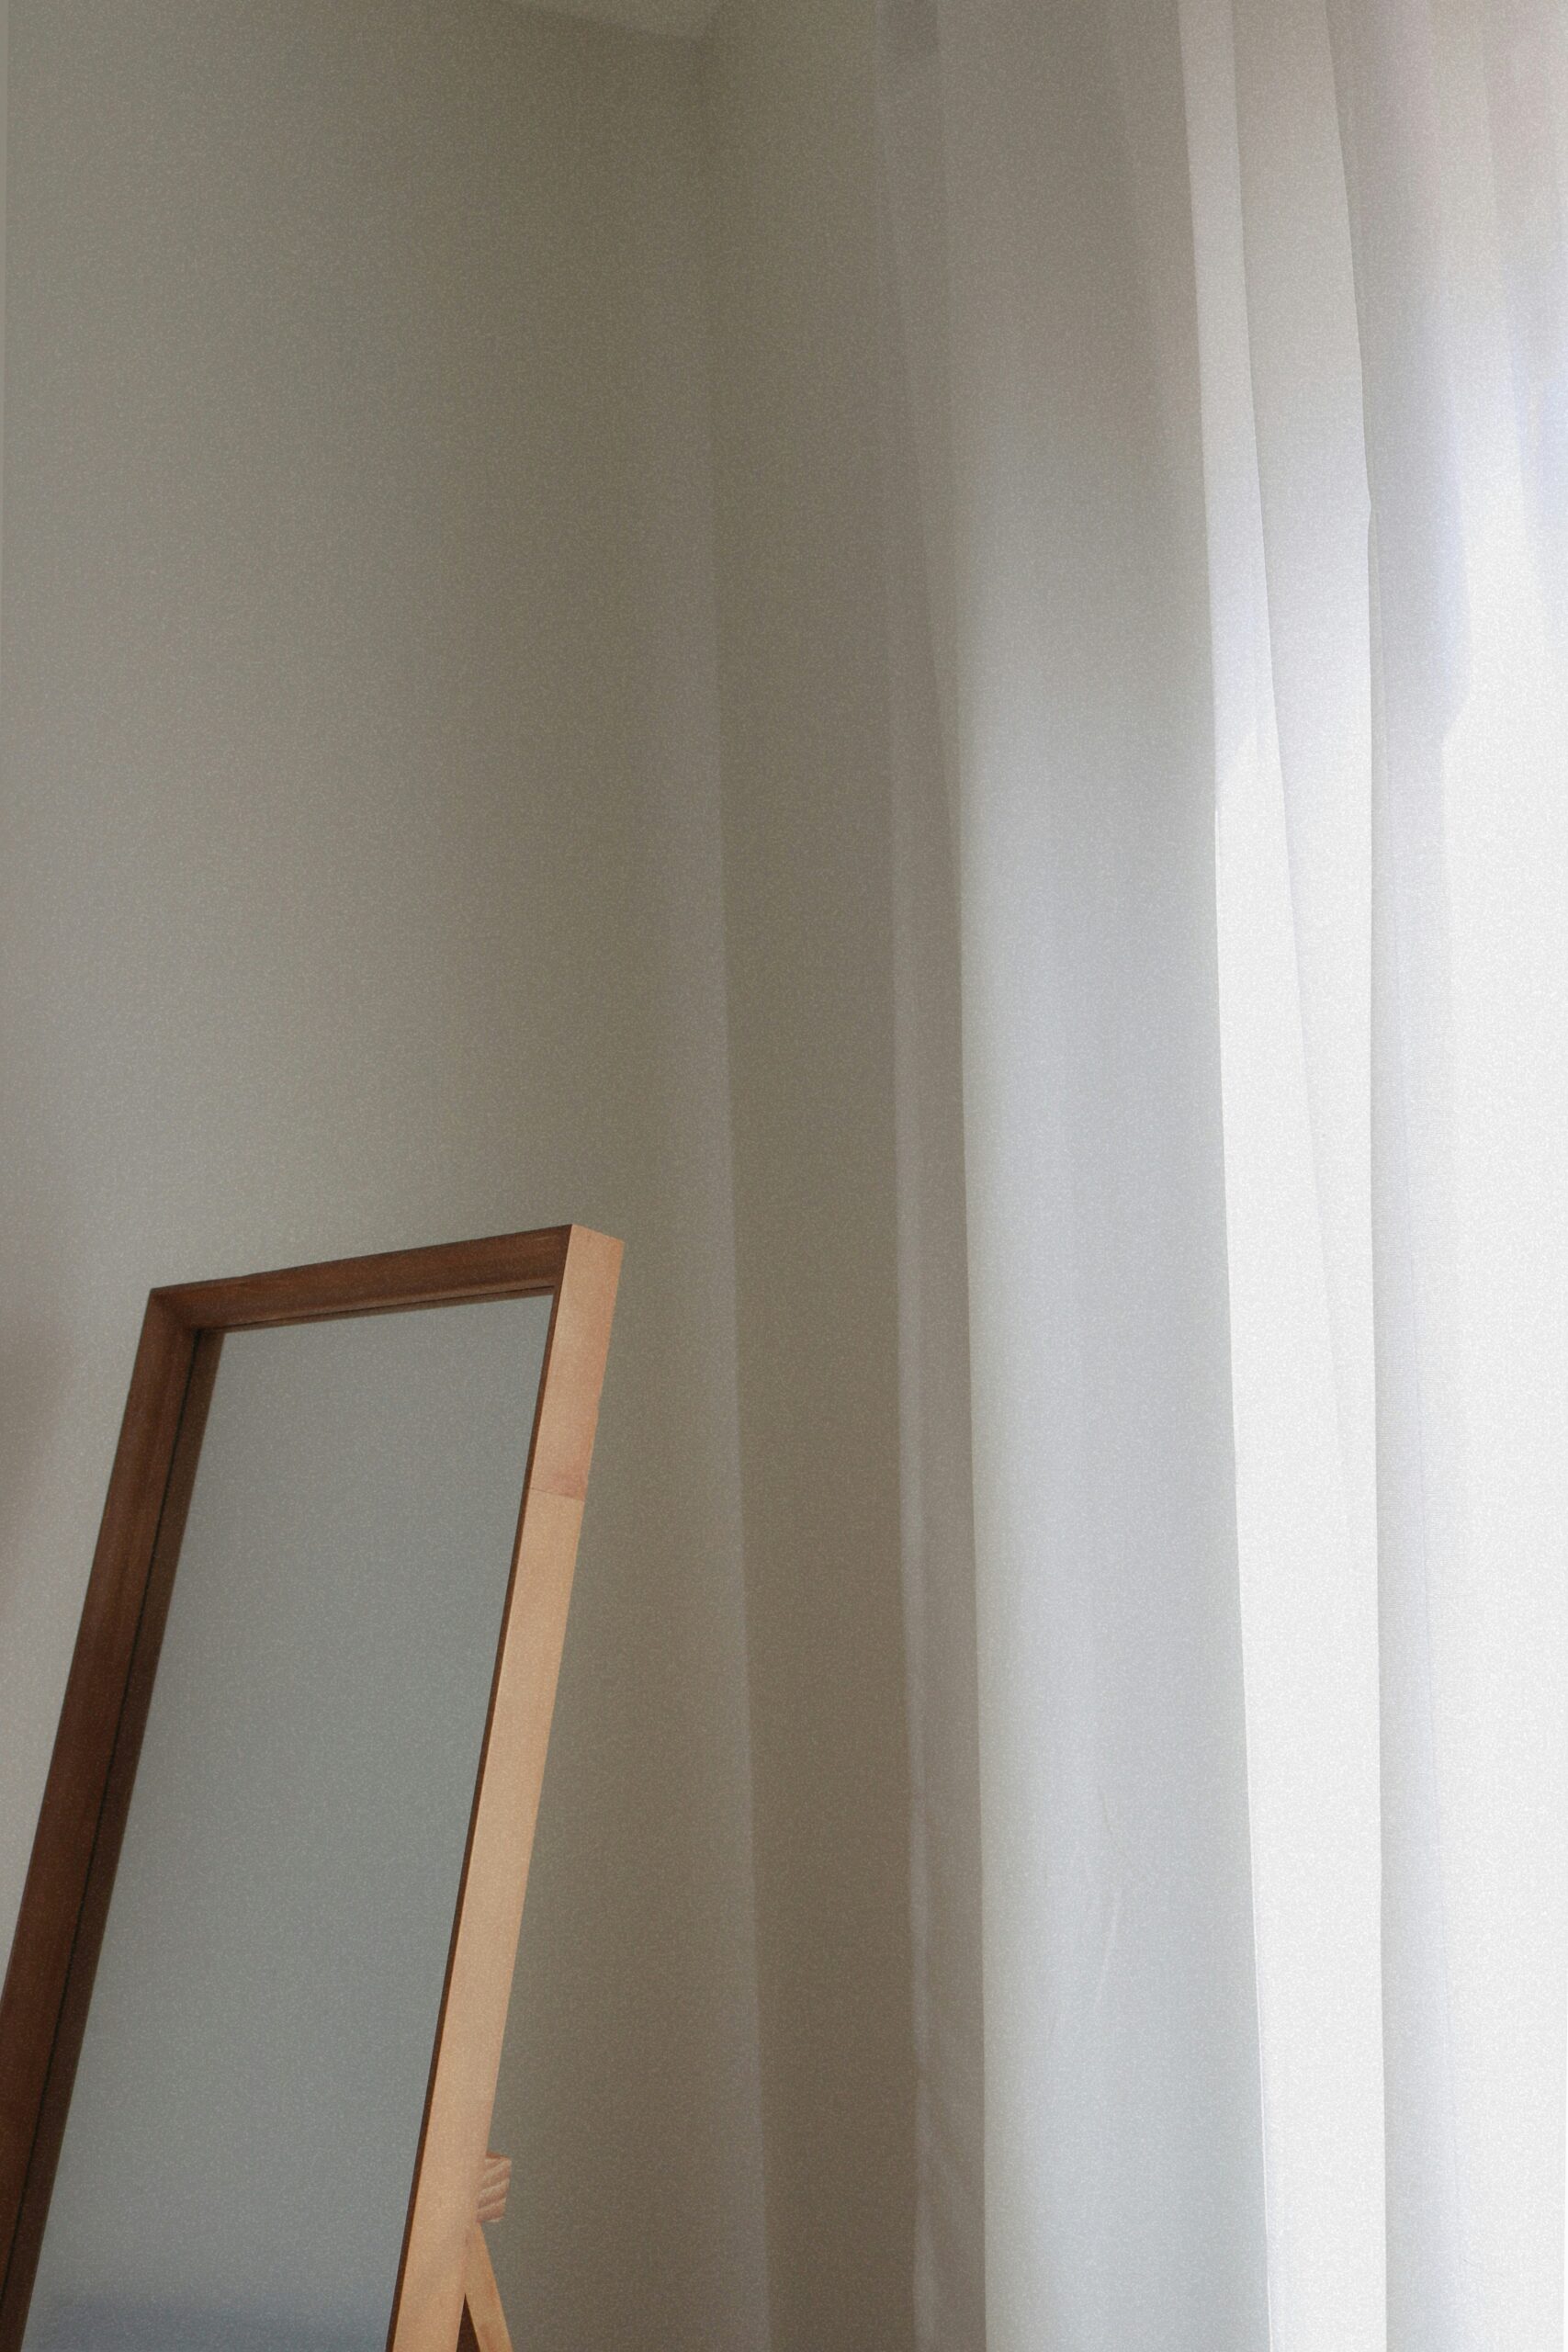 A simple wooden-framed mirror stands adjacent to white sheer curtains in a bright corner of a room.